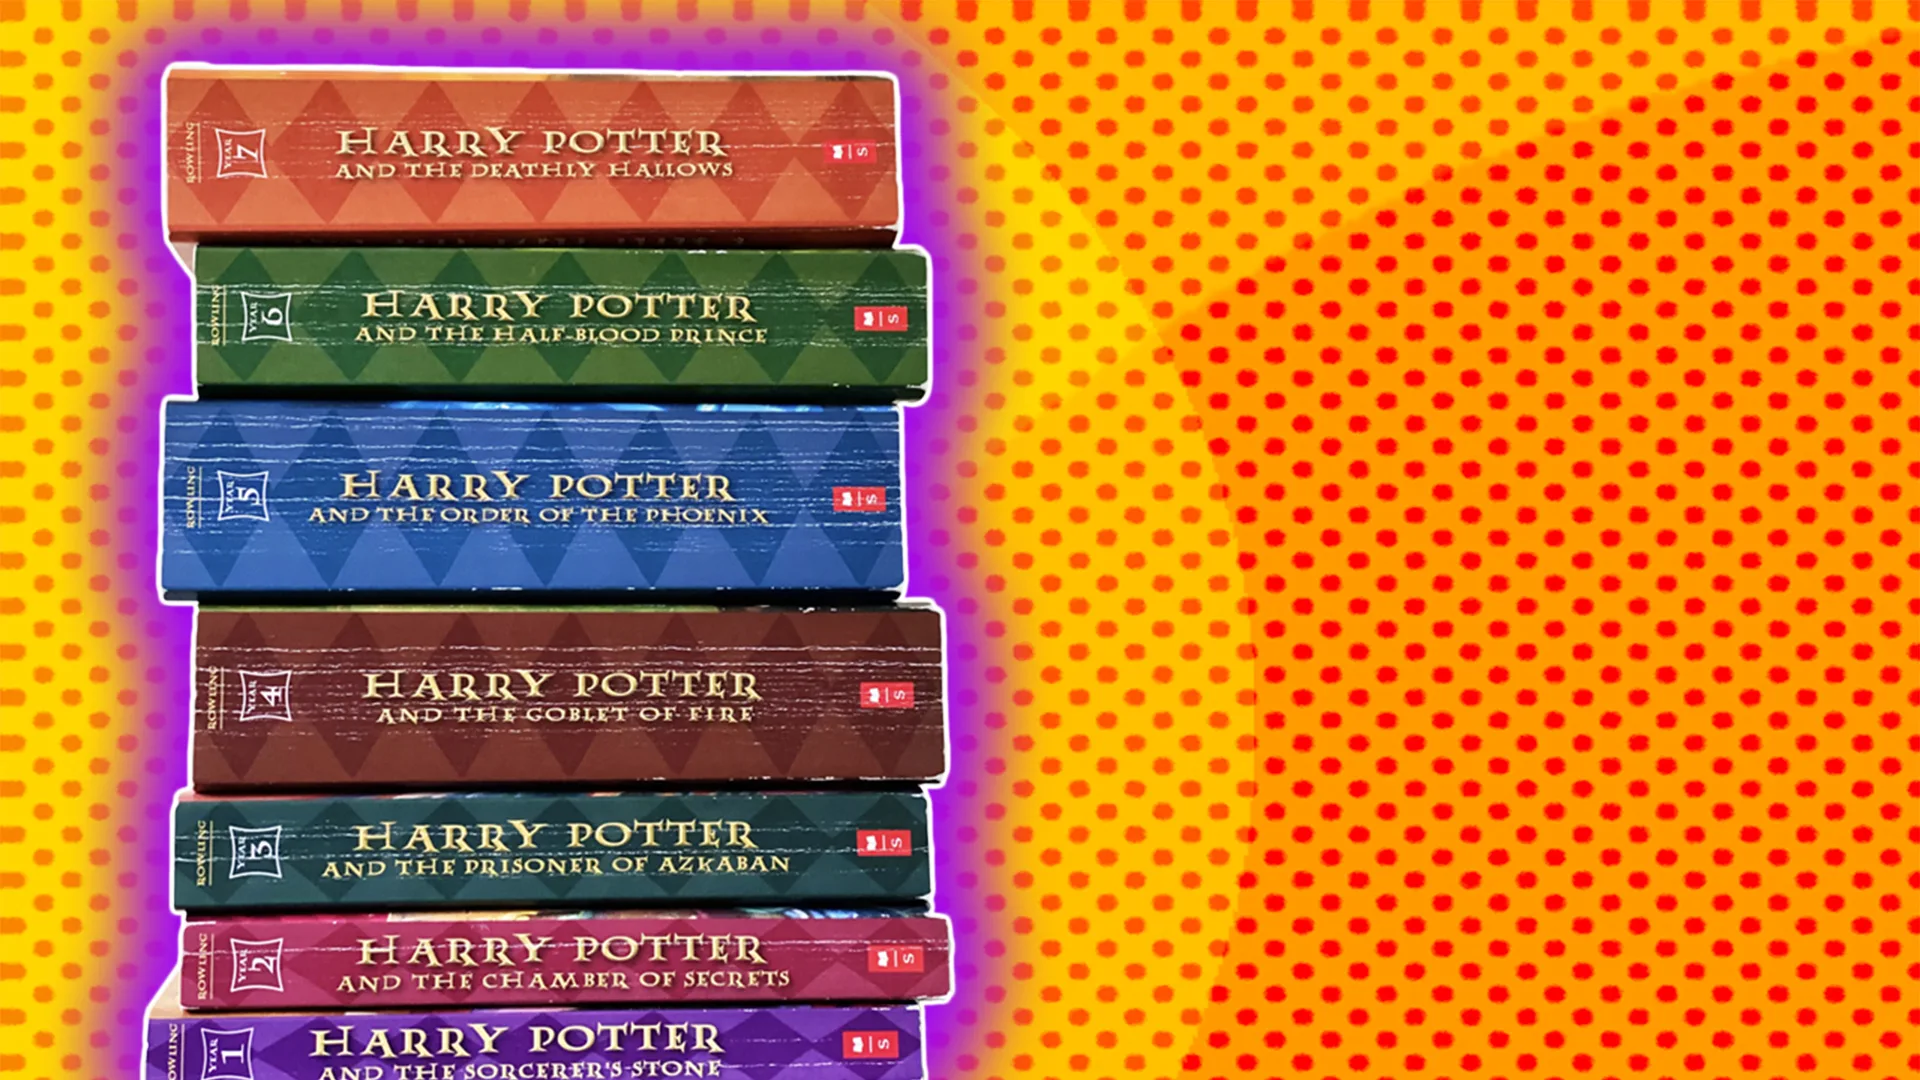 Harry Potter books in a pile with a polkadot background and a glow around the image